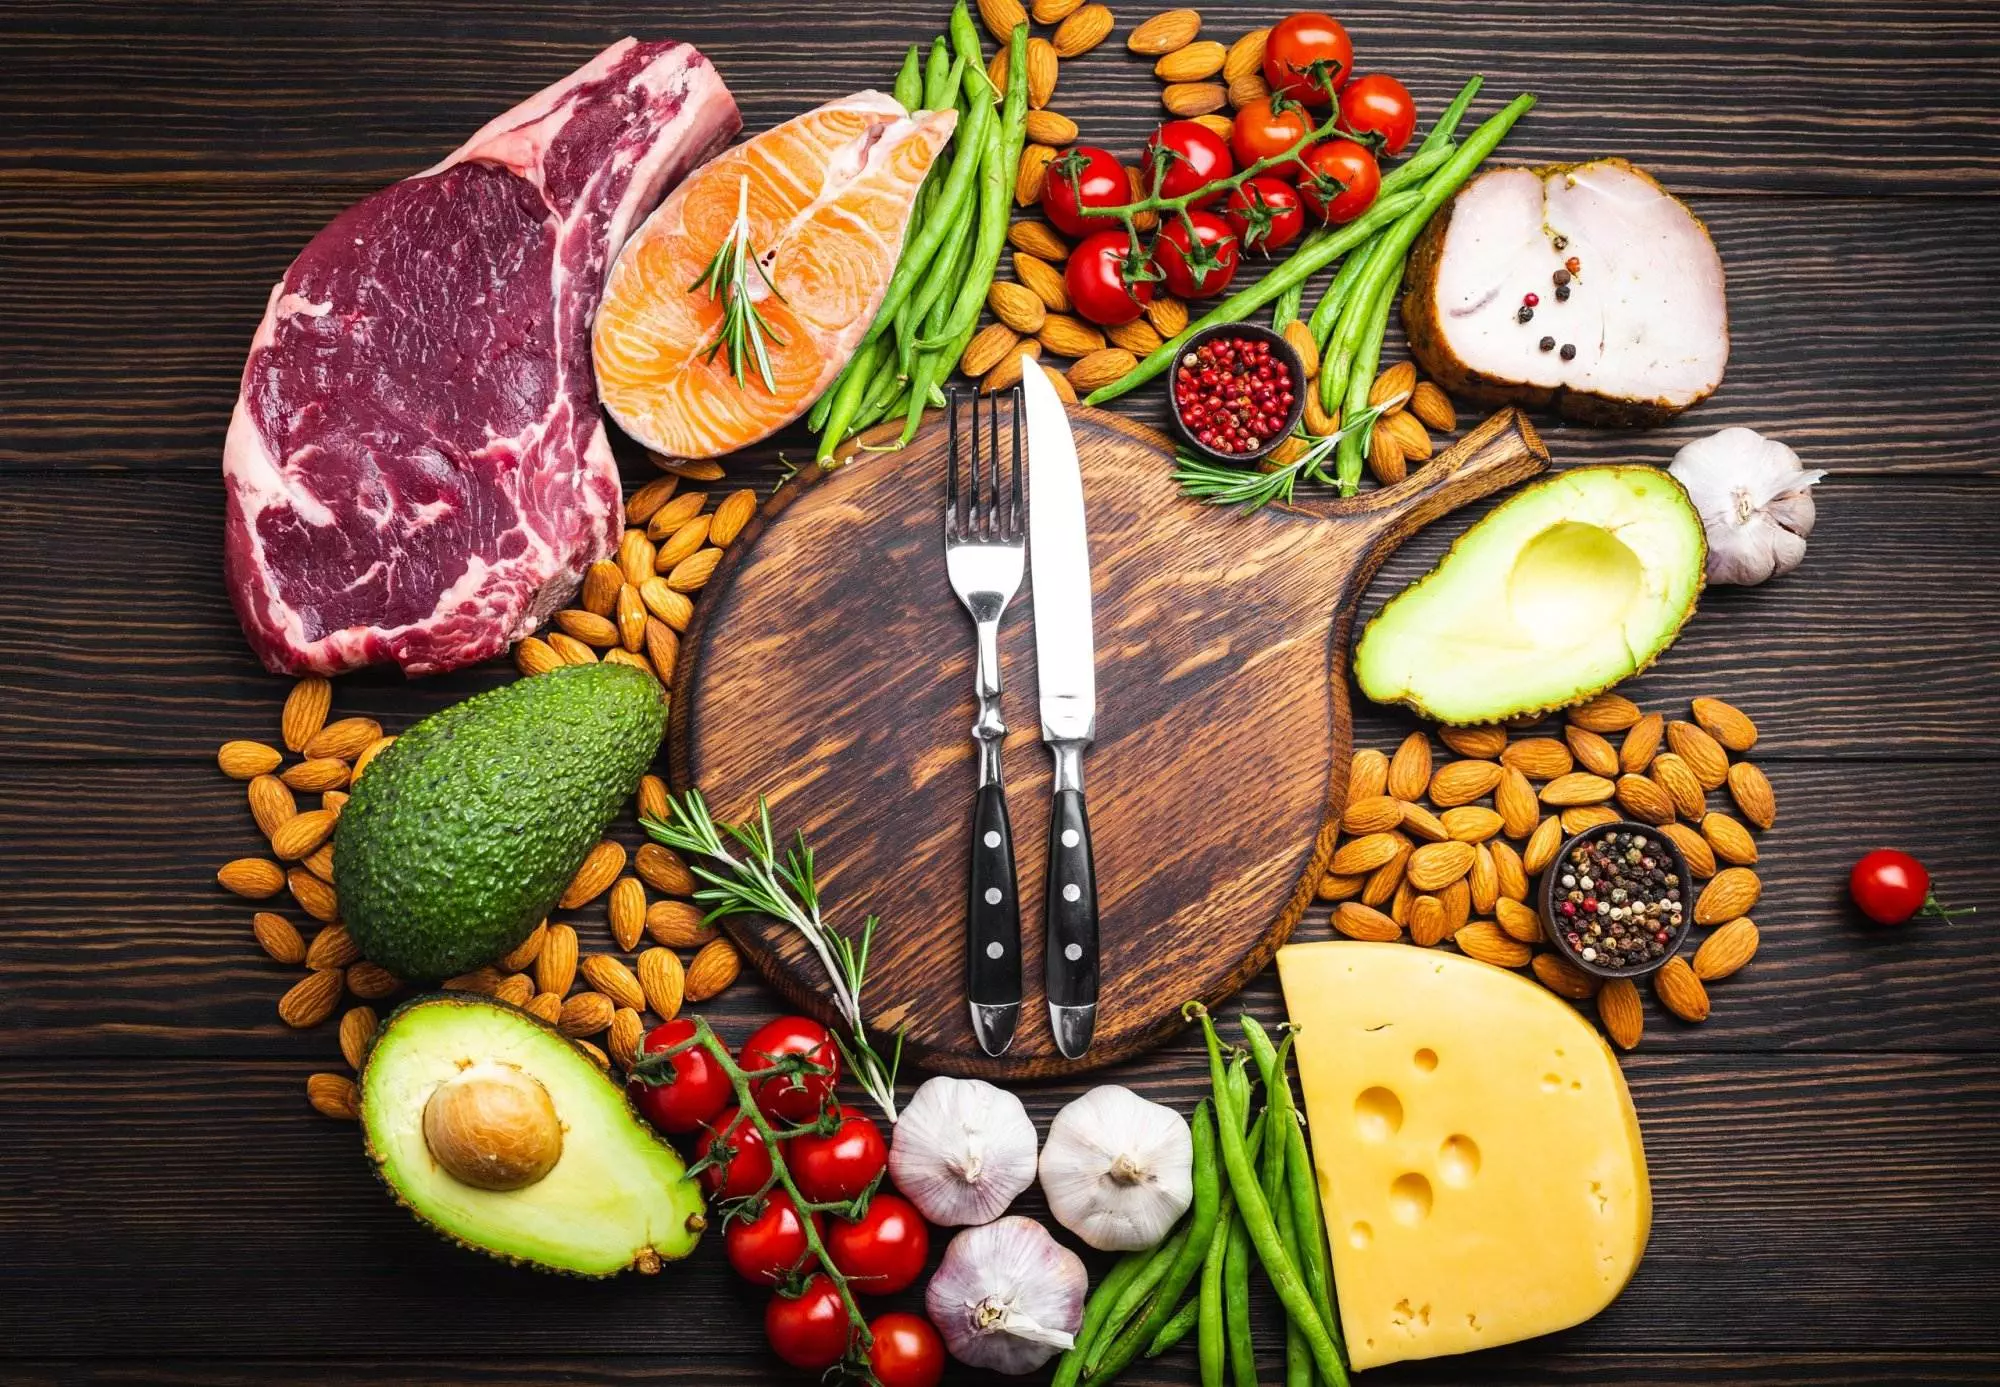 Assorted healthy food ingredients: meat, fish, cheese, vegetables, nuts, avocado on wooden background